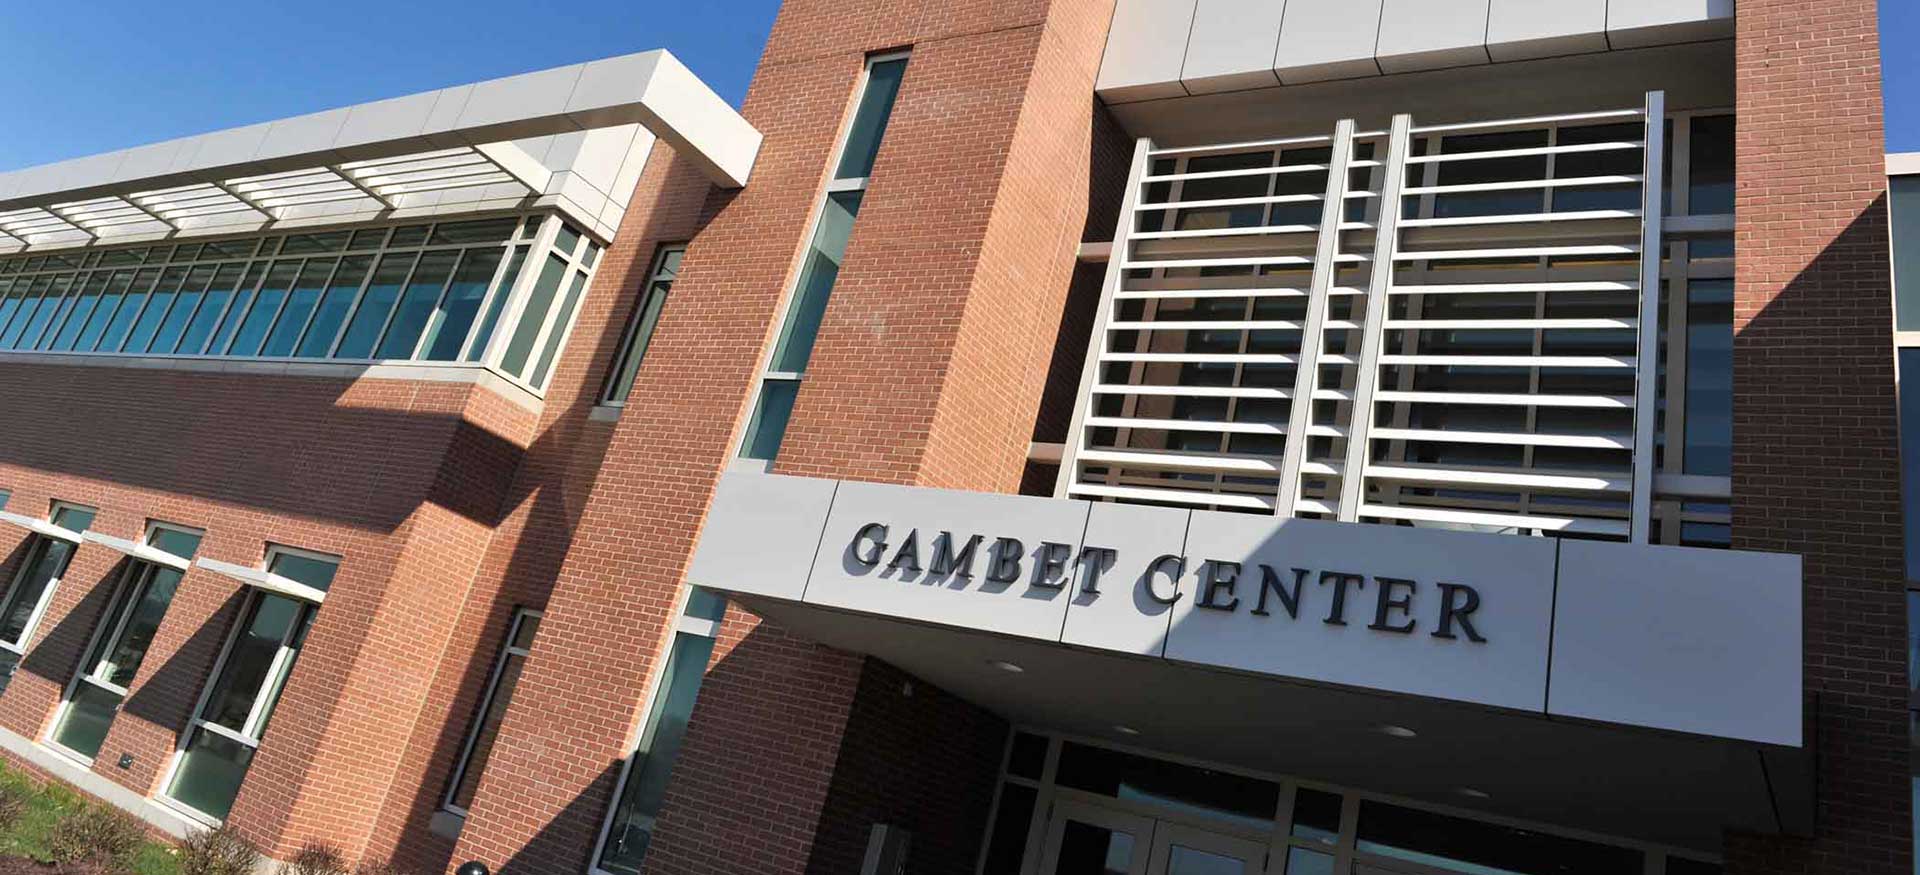 Gambet Center for Business & Healthcare